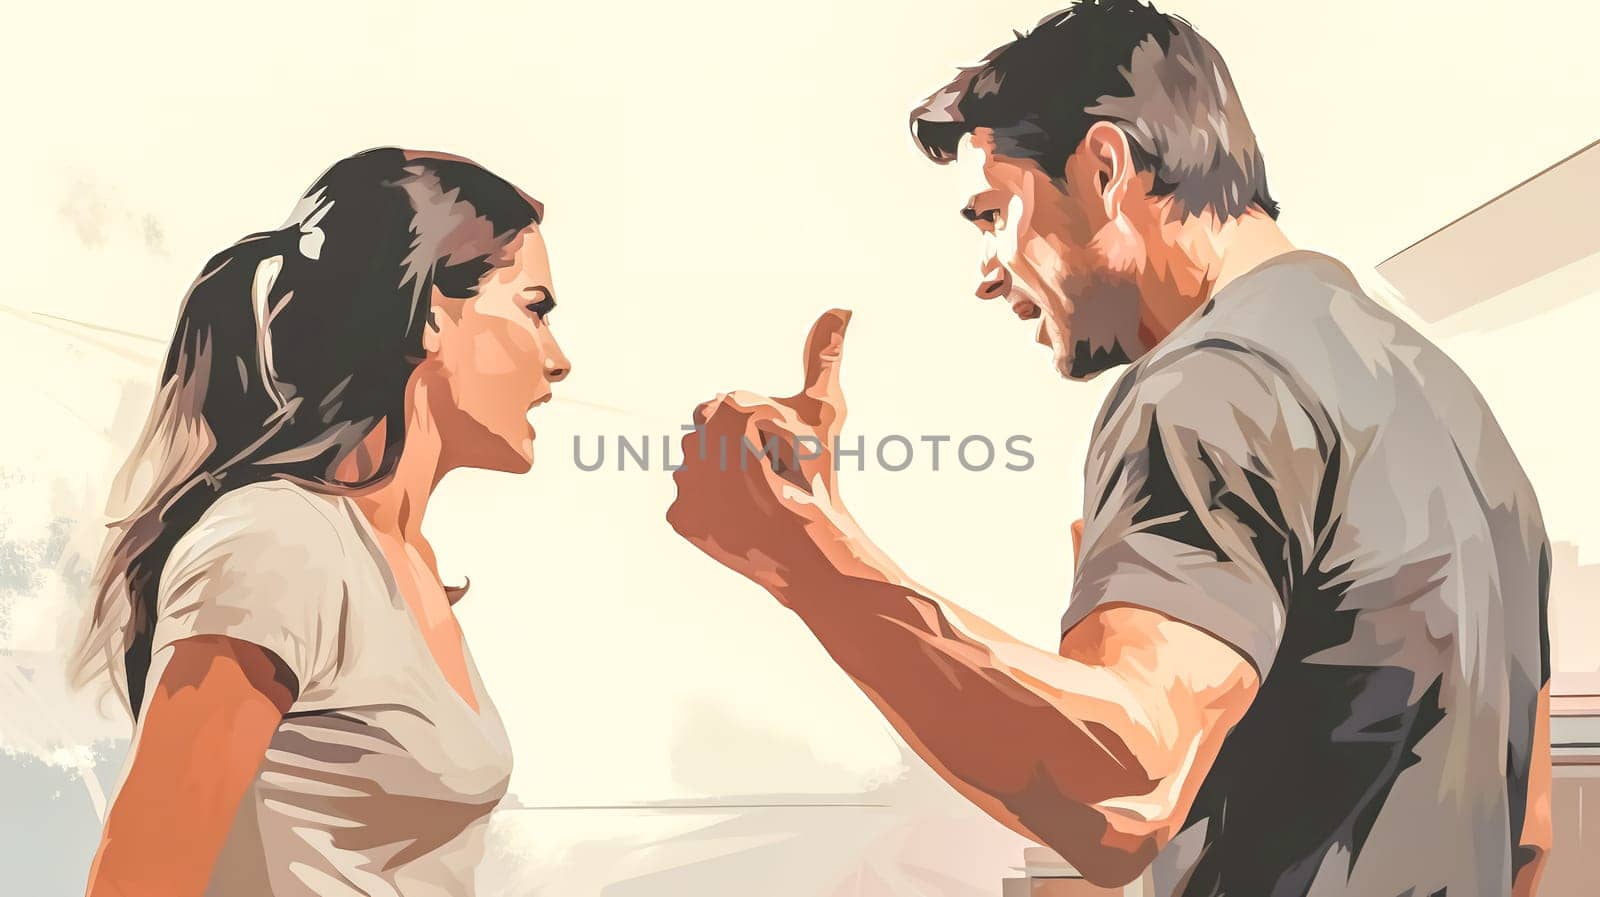 A woman and man in a heated argument, with the man pointing a finger and the woman looking defiant, the concept of partner disputes and domestic violence.